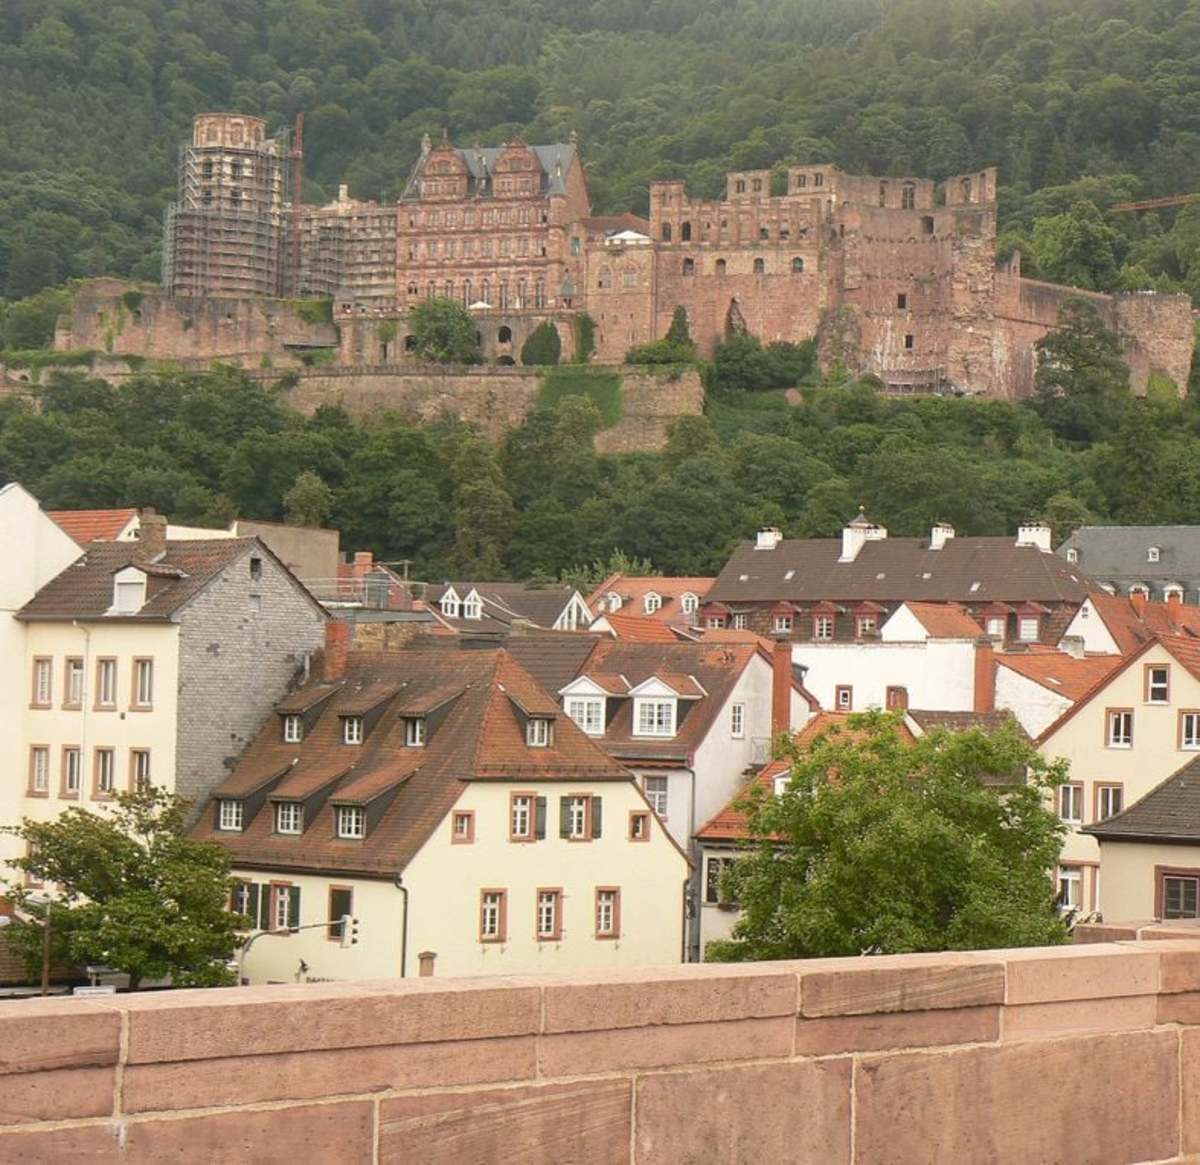 A Rough Guide to Germany - Things to Do in Heidelberg